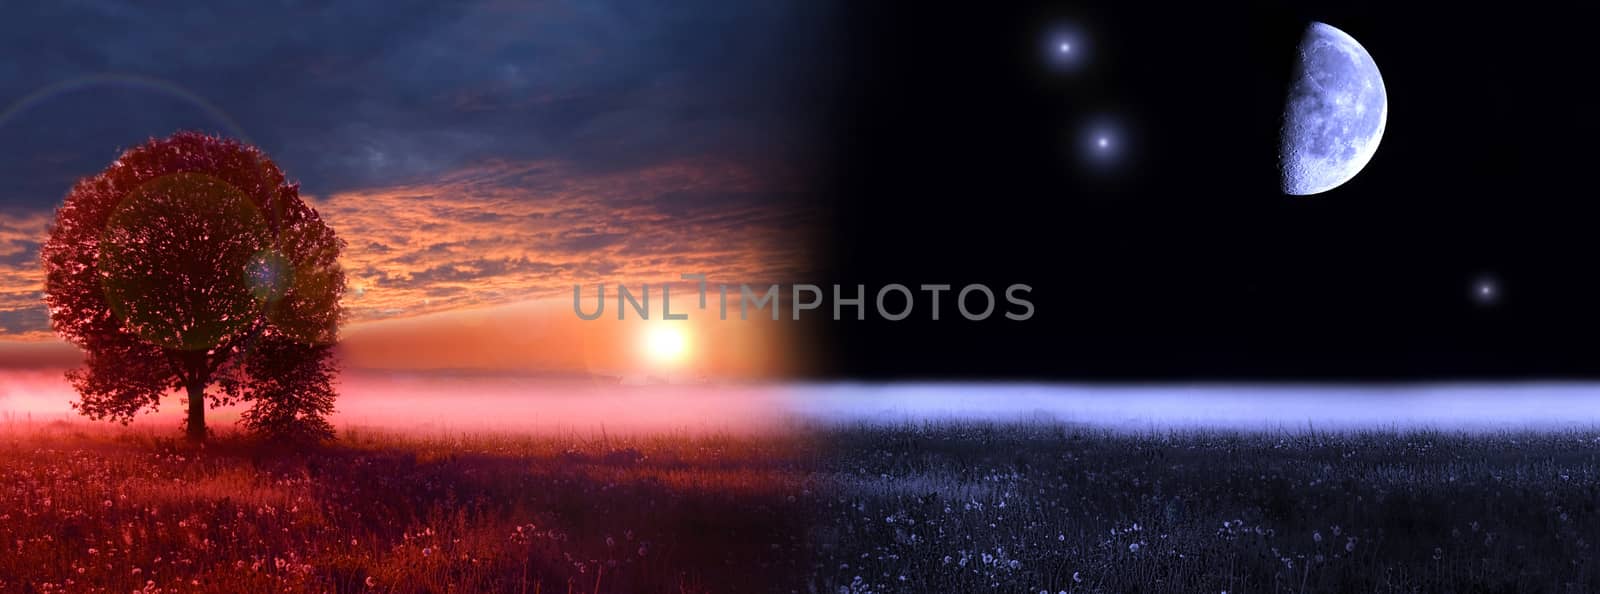 Day and night conceptual image. by satariel